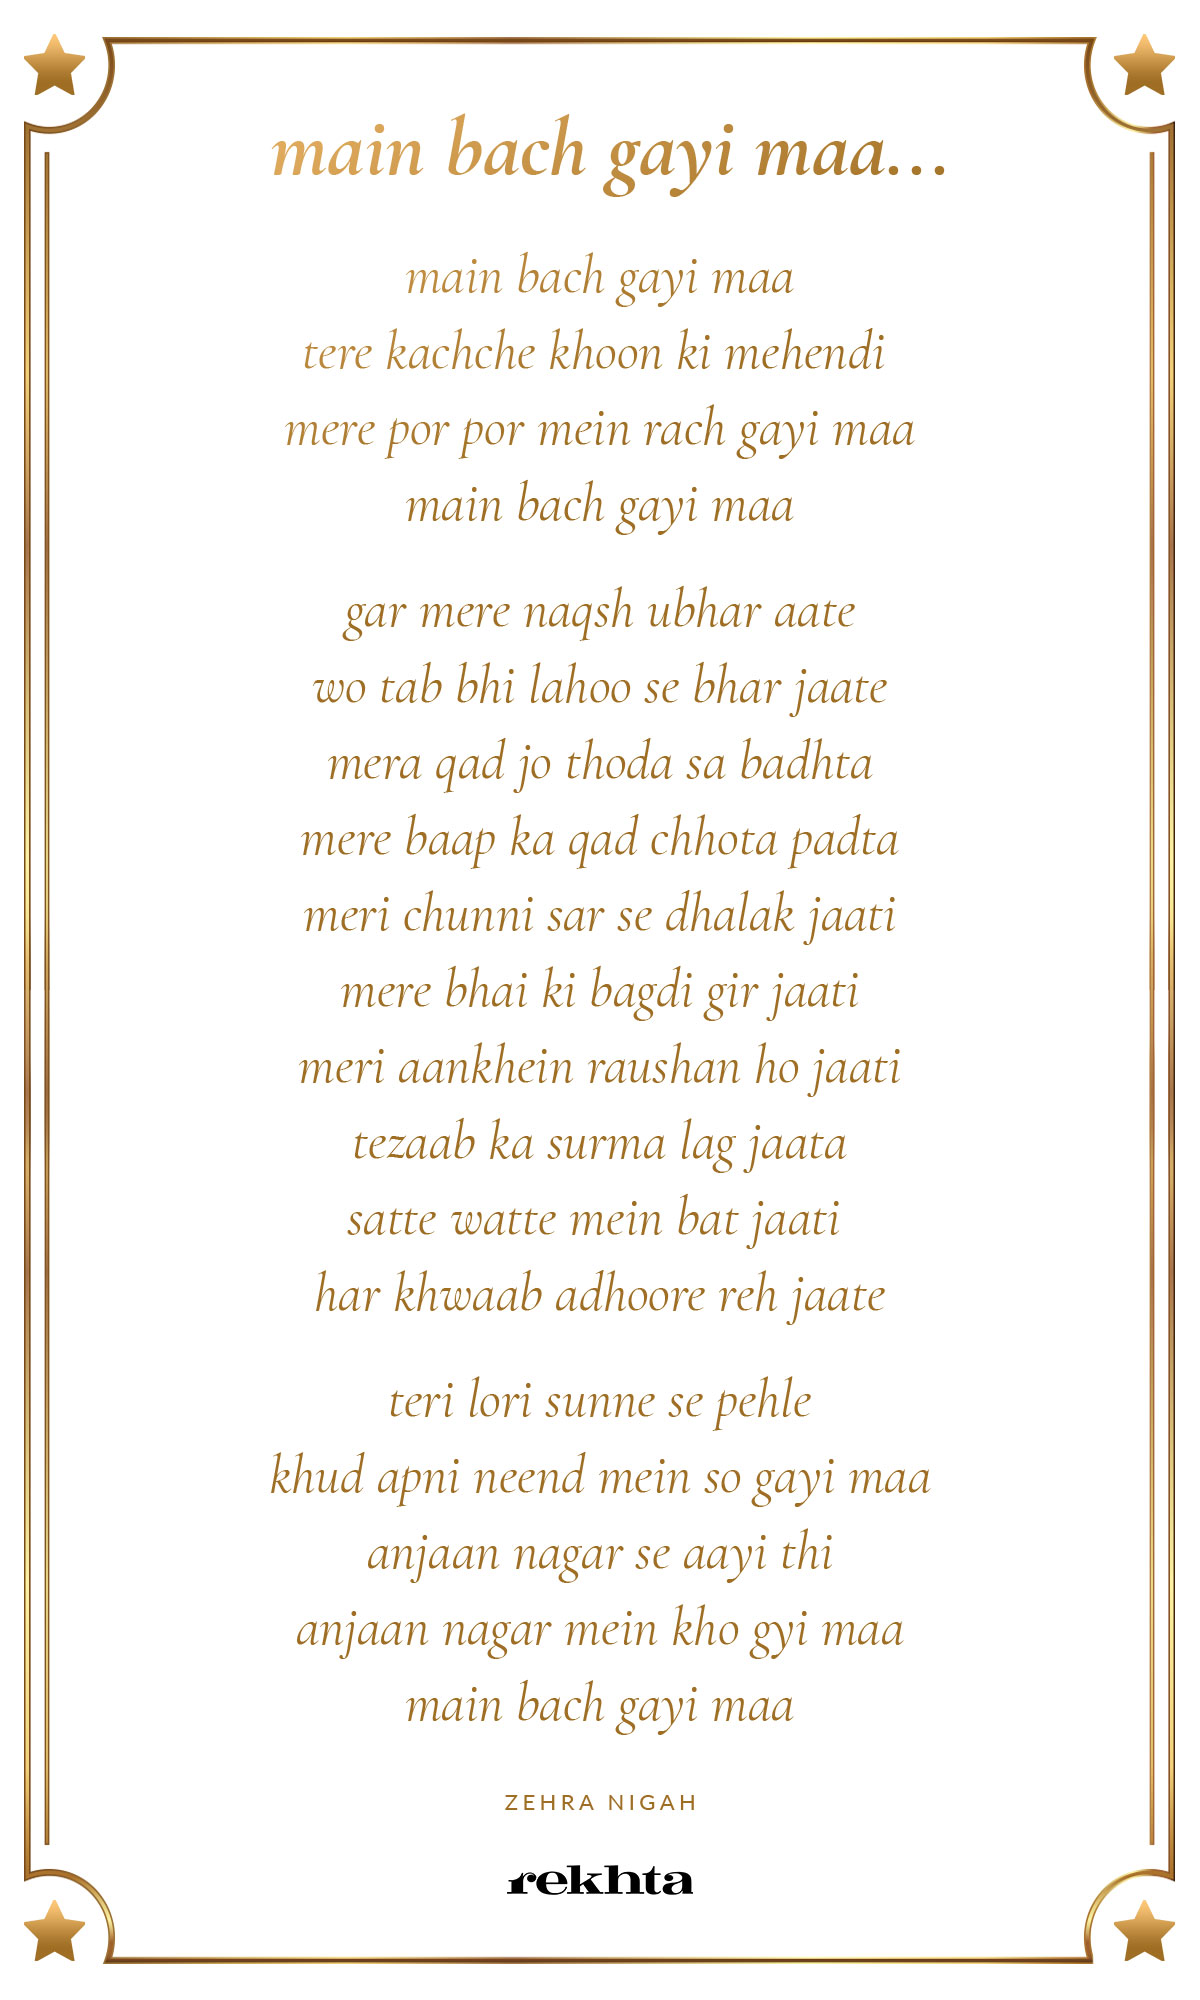 Shaam Ka Pehla Taara(On cover)+ Title Zehra Nigah: Cheerfully Towards Eighty One (Sub-title) Urdu poetry is often appropriated to eulogize female beauty and grace. This notion about women has been reiterated by ghazal that literally translates to amatory conversation with women. In times when women were not encouraged as poets and were presented only as a subject of poetry, Zehra Nigah distinguished herself both as a poet and a woman and became, in turn, an inspiration for women. apna har andaaz aankhon ko tar-o-taza laga kitne din ke baad mujh ko aa’ina achchha laga jo dil ne kahi lab pe kahan aayi hai dekho ab mehfil-e-yaaraan mein bhi tanhaayi hai dekho koi hangama sar-e-bazm uthaya jaye kuch kiya jaye charaGon ko bujhaya jaye iss ummeed per roz charaG jalate hain aane waale barson baad bhi aate hain Zehra Nigah was a young petite girl when she first started to appear in mushairas. At her maiden mushaira, she shared the stage with many a legend including Jigar Moradabadi. Zehra has herself acknowledged at various occasions that it was Jigar who taught her the etiquettes of a mushaira. She fondly recalls an incident where Jigar had asked her not to bow down too humbly when accepting praise for her poetry, as women are above that: “sar ki KHafeef jumbish se bhi ye farz adaa kiya ja sakta hai.” Hawwa ki kahani Tumhein seb khaaney ki targheeb main ney naheen dee Wo genhoon ka daana meri dastras mein naheen thhaa Meri saanp sey dosti bhi naheen thhee Agar dosti thhee kisi se, wo tum they Agar koyi achchaa lagaa thha, wo tum they Zehra Nigah’s work is exemplary because she has been a voice of resistance against the atrocities of her times. Her hard hitting nazms still echo in our memories. Justifiably enough, they will continue to pass the message to the future generations. She once said in an interview, “A poet can never write poetry if s/he is not affected by his/her surroundings.” Main bach gayi maa Main bach gayi maa Tere kachche khoon ki mehendi Mere por por mein rach gayi maa Main bach gayi maa Gar mere naqsh ubhar aate Wo tab bhi lahu se bhar jaate Mera qad jo thoda sa badhta Mere baap ka qad chhota padta Meri chunni sar se dhalak jaati Mere bhai ki bagDi gir jaati Meri aankhein raushan ho jaati Tezaab ka surma lag jaata Satte watte mein bat jaati har khwab adhoore reh jaate teri lori sunne se pehle khud apni neend mein so gyi maan anjaan nagar se aayi thi anjaan nagar mein kho gyi maa main bach gayi maa Today on May 14, we celebrate the ever-graceful poet Zehra Nigah’s 81st birthday. A woman of substance, courage and resilience, she is an ideal example of how a woman may play different roles all through her life. She once expressed that life gave her the material for poetry in all its variety as a mother, observer, traveler and learner. Video of a London Mushaira https://www.youtube.com/watch?v=x7t3mm1h3Po Another video for consideration https://www.youtube.com/watch?v=pSnawcBzwUw